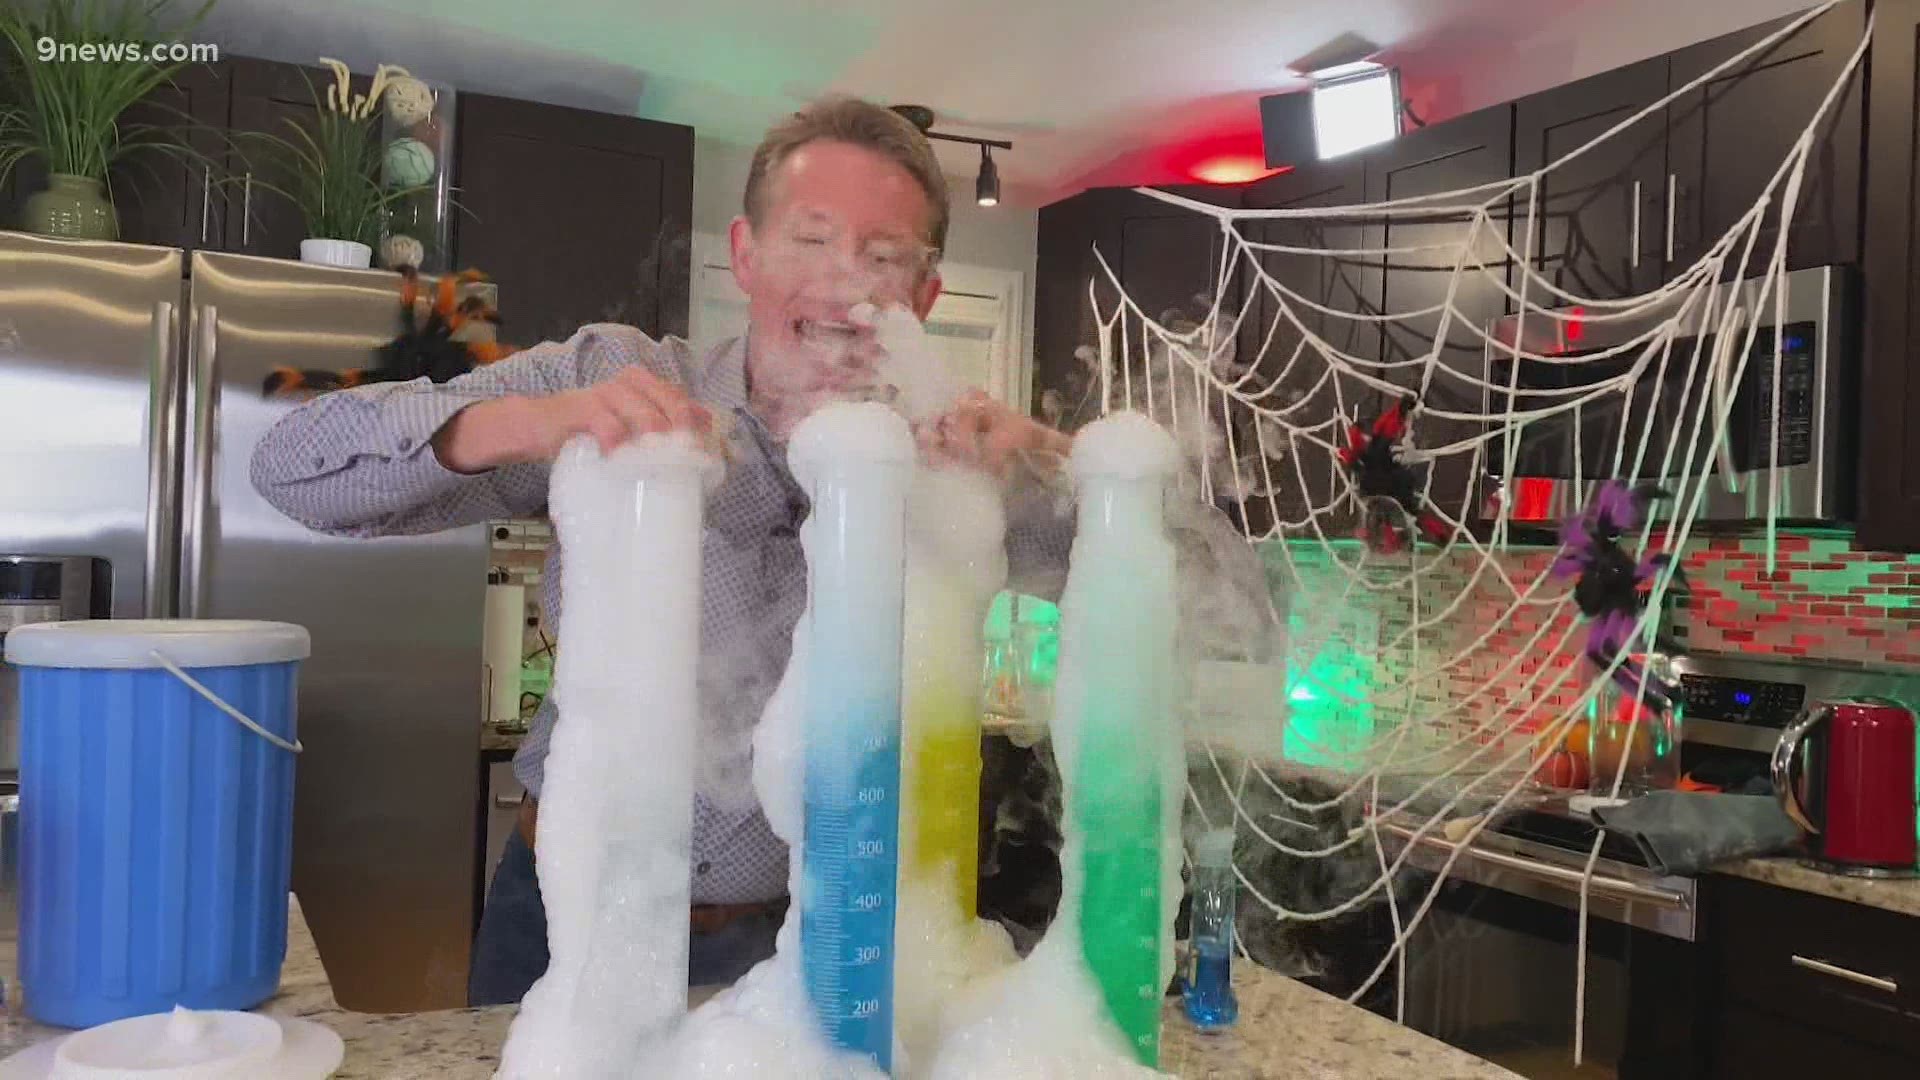 Soapy water isn't just for cleaning your hands when you're Steve Spangler. Add a piece of dry ice to the mixture and your Science Minute will turn into hours of fun.